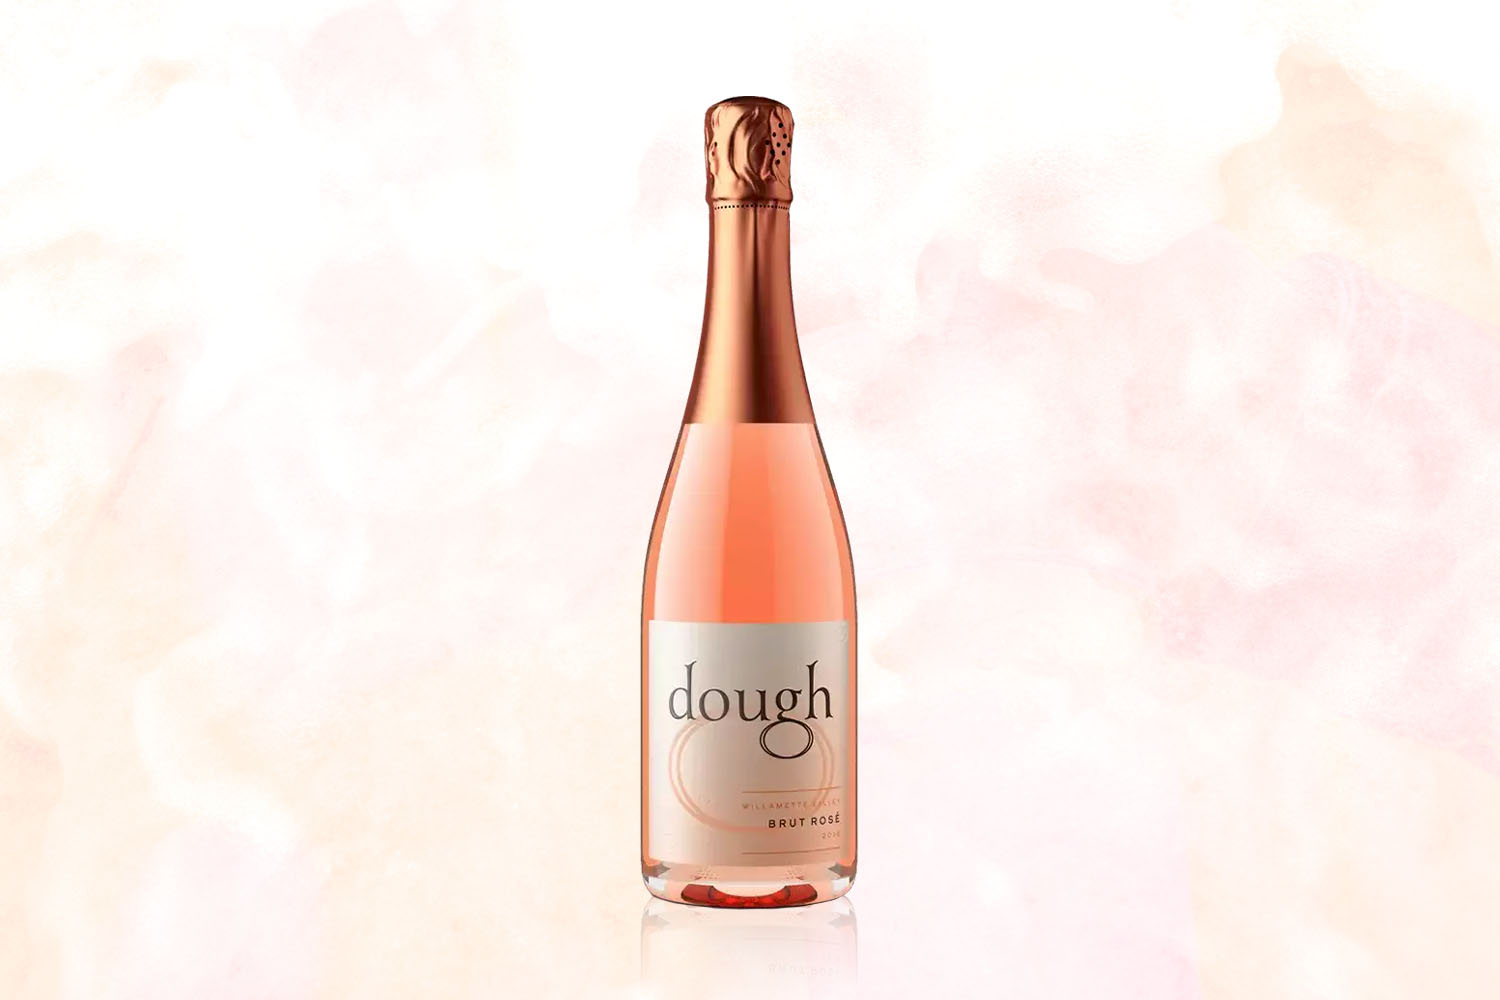 A bottle of Dough Sparkling Rosé on a pale pink background